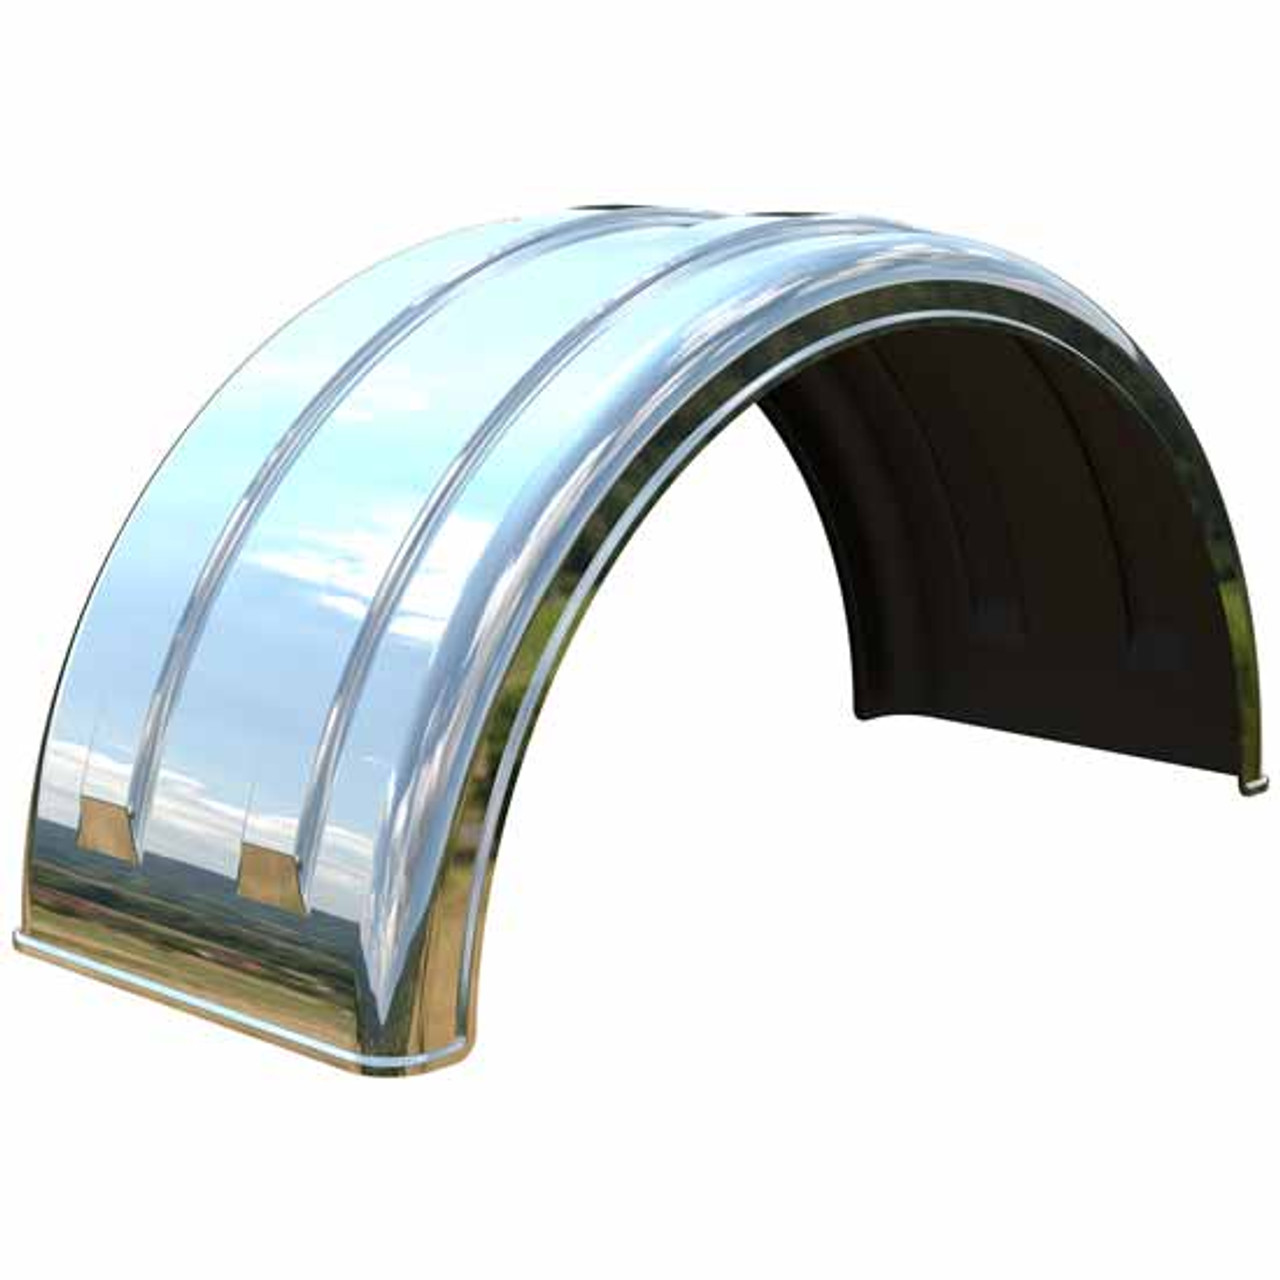 Minimizer Poly Fenders - Silver Mirror Finish For 22.25 Inch & 24.5 Inch  Wide Base Tires